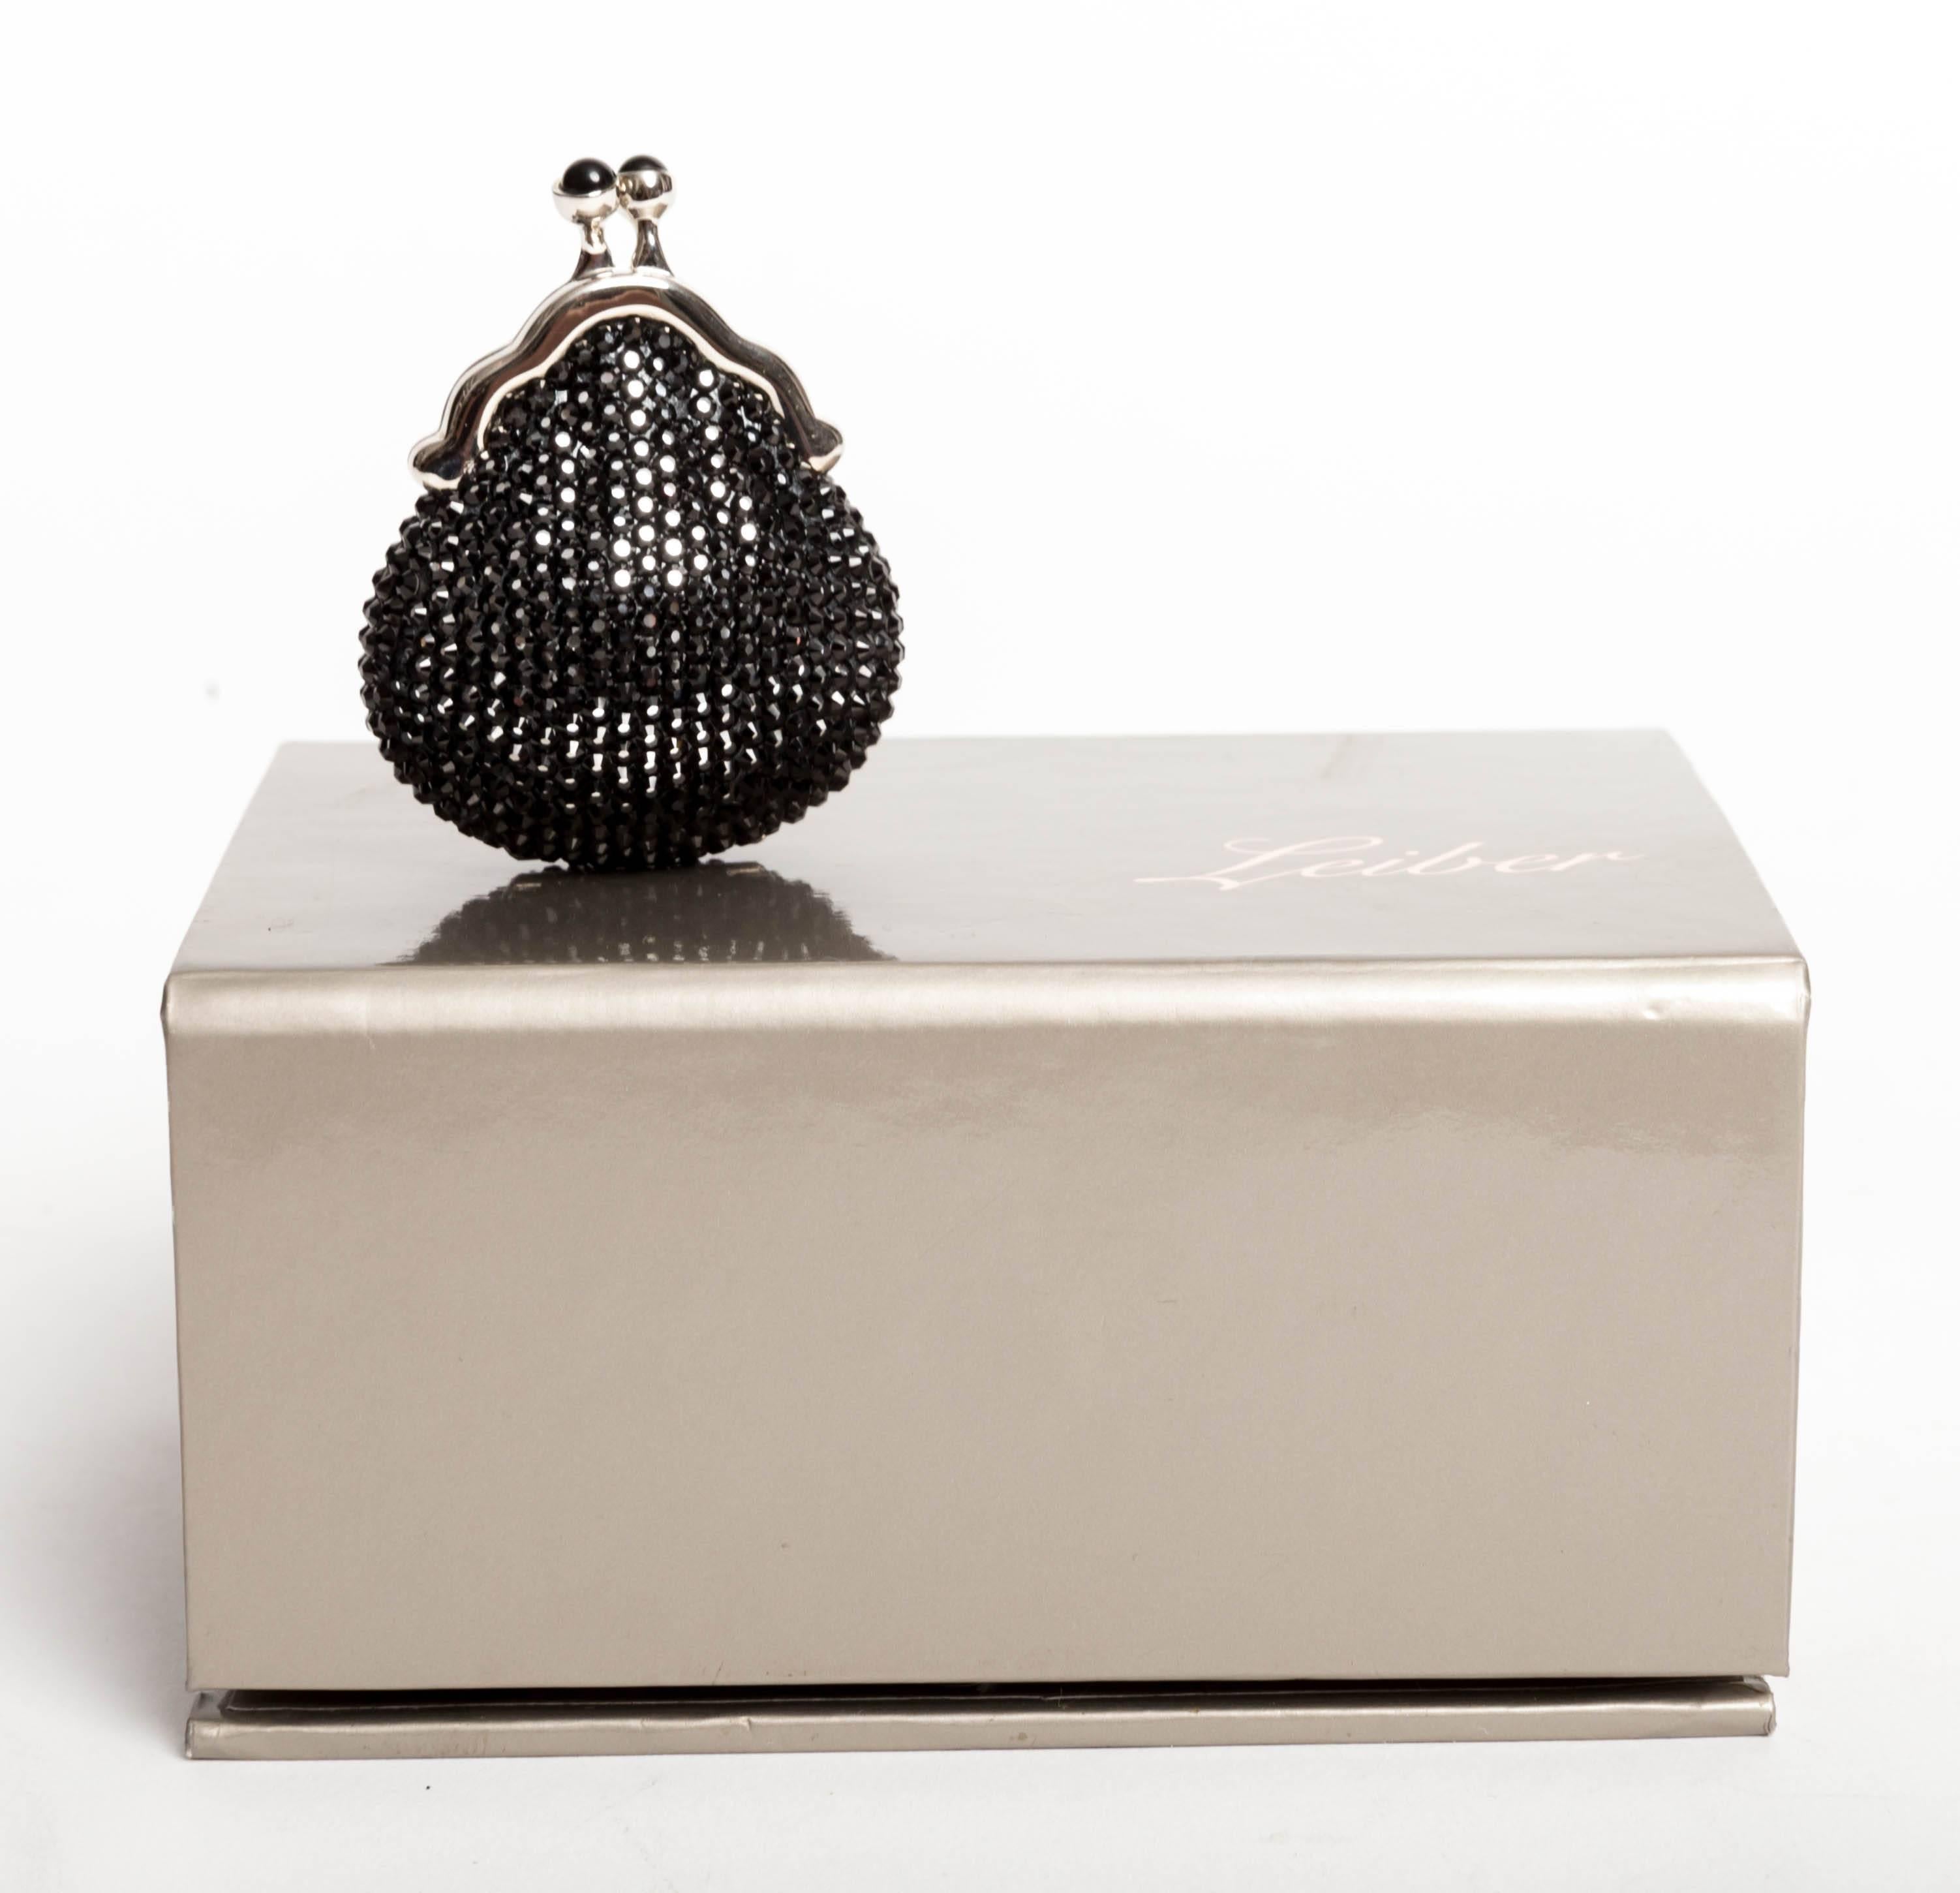 Exquisite Judith Leiber Black Crystal Pill Box with Onyx Cabochon Clasp.
Excellent condition.